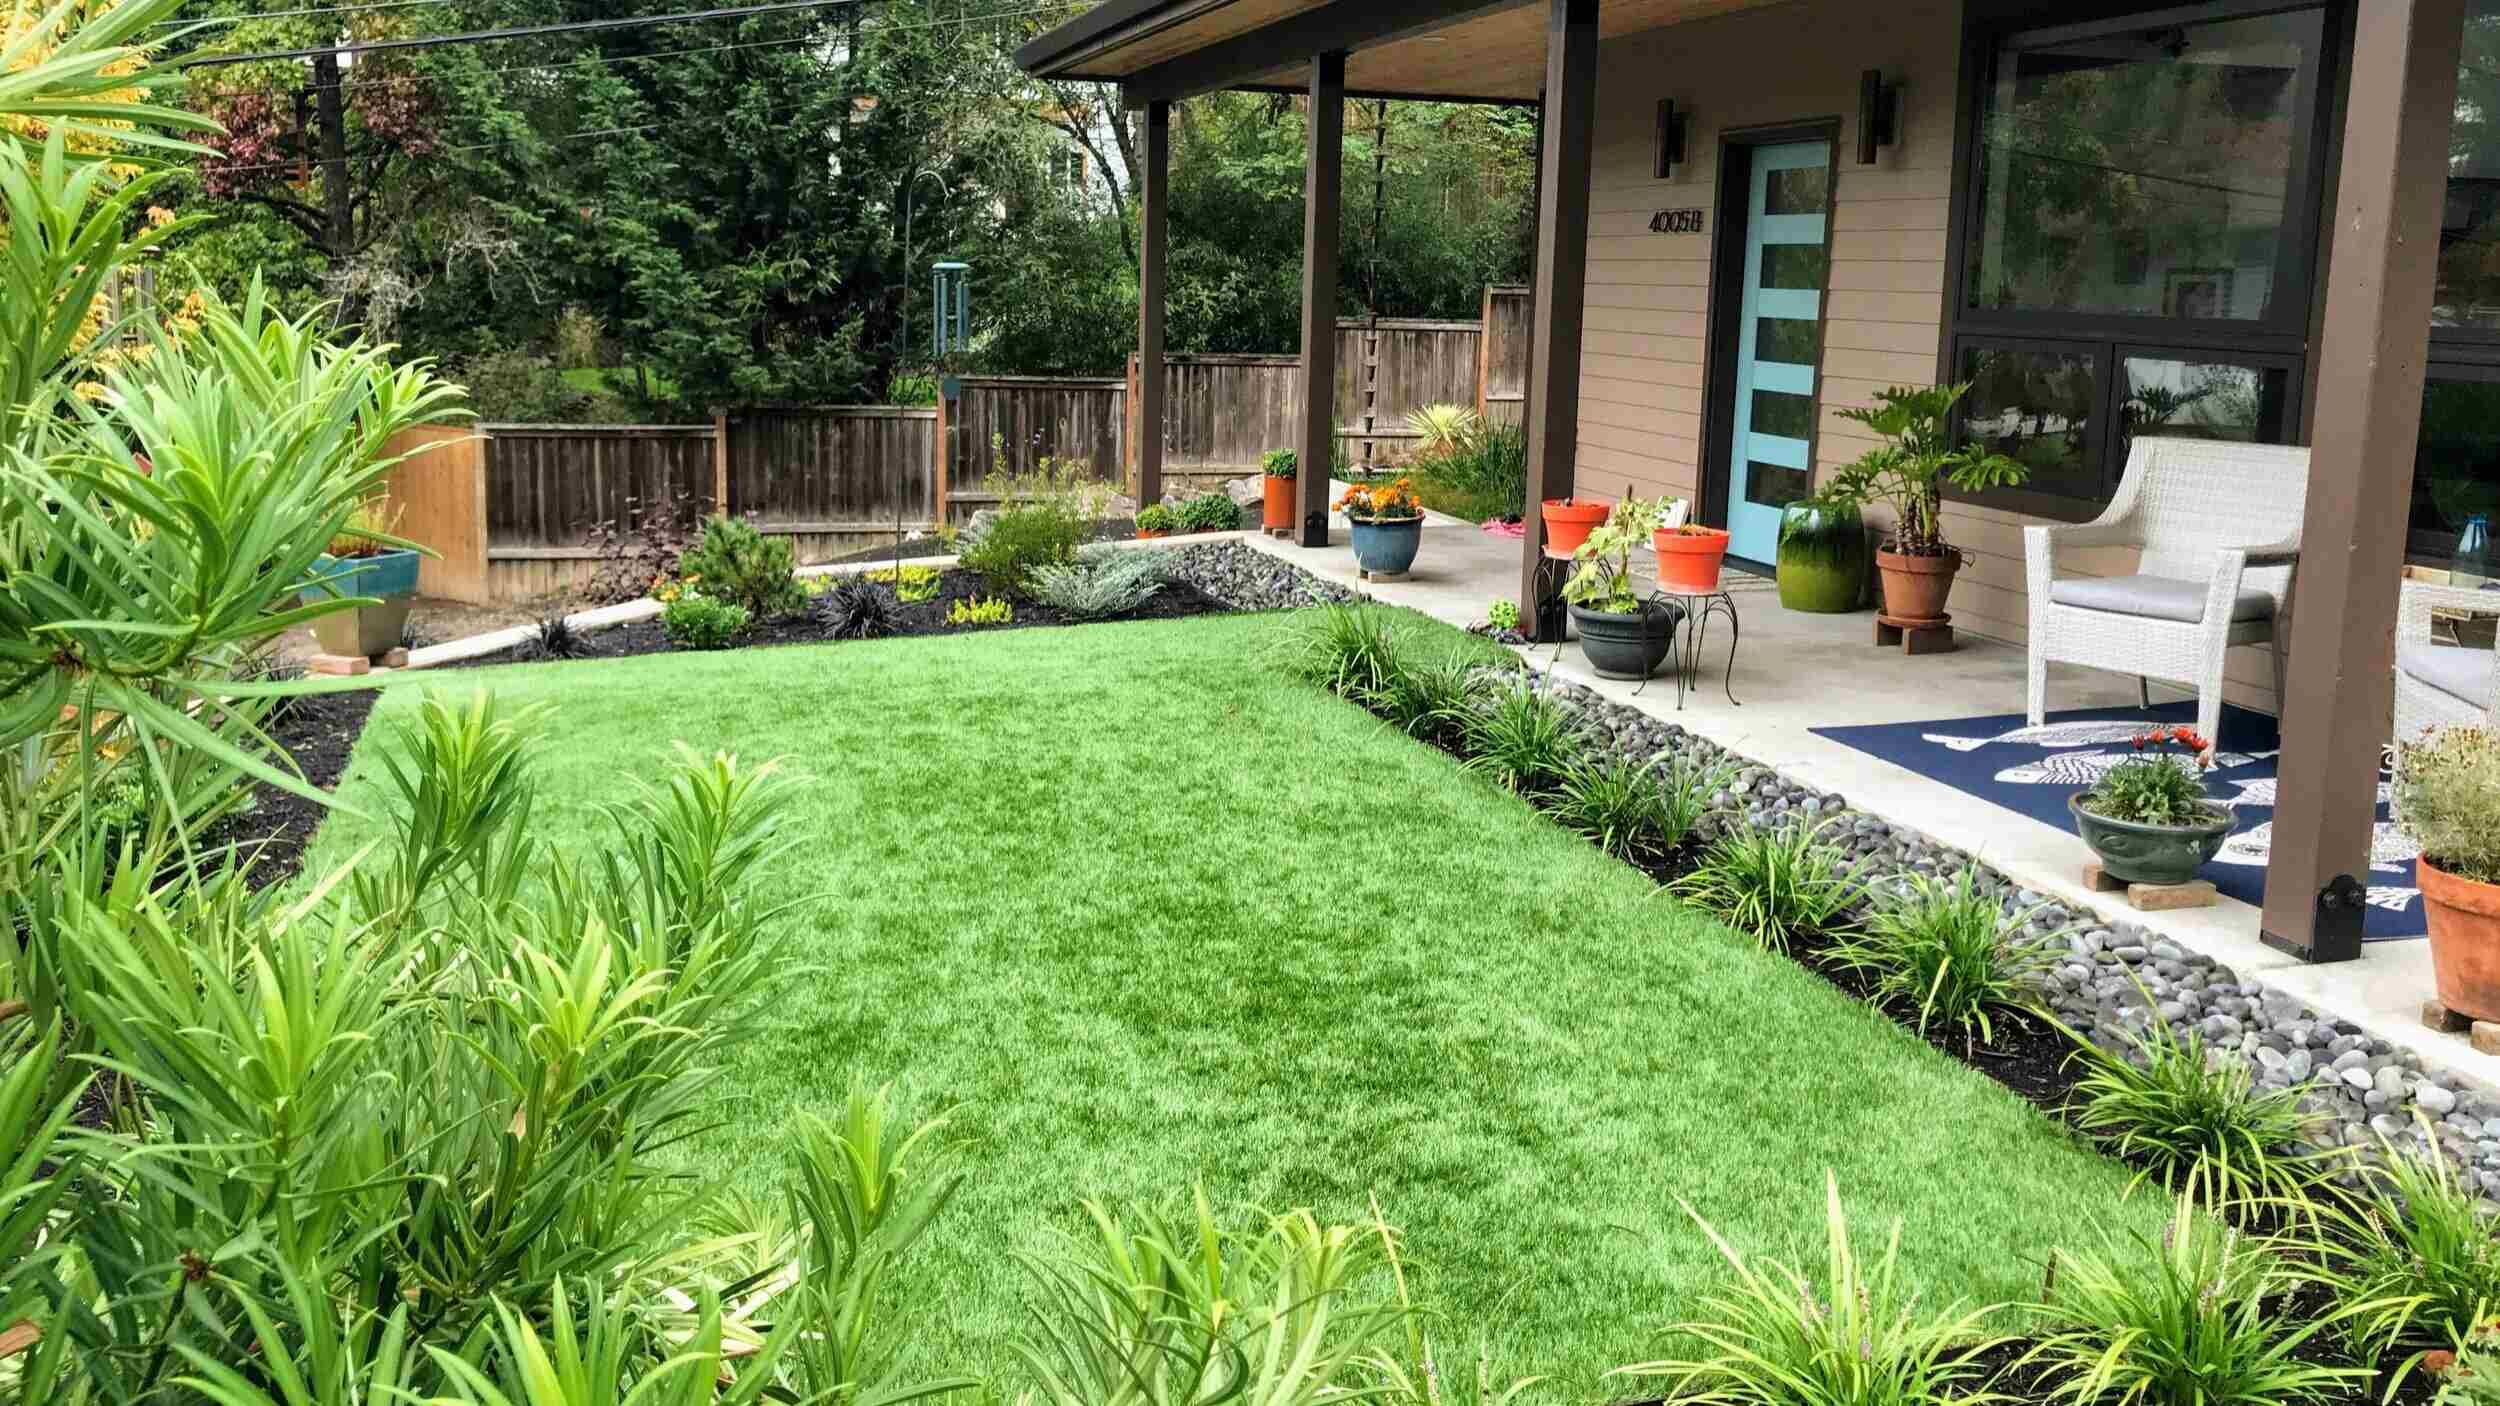 How Much Does It Cost To Put Grass In Backyard